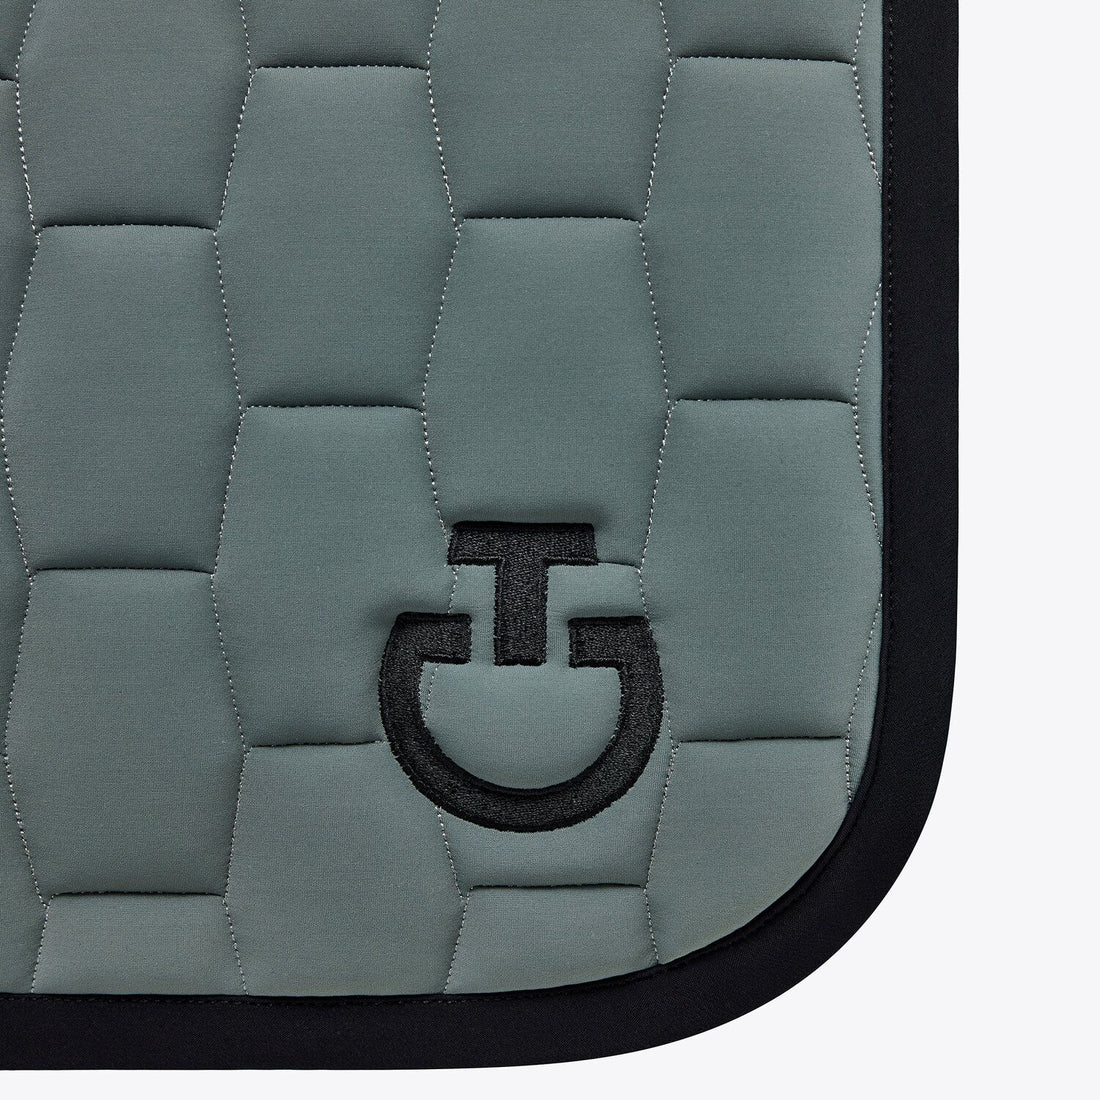 Jumping saddle pad with wave quilting and an embroidered logo on the side. This accessory has an outer performance fabric face that’s lined in waffle texture cotton fabric on the inside.